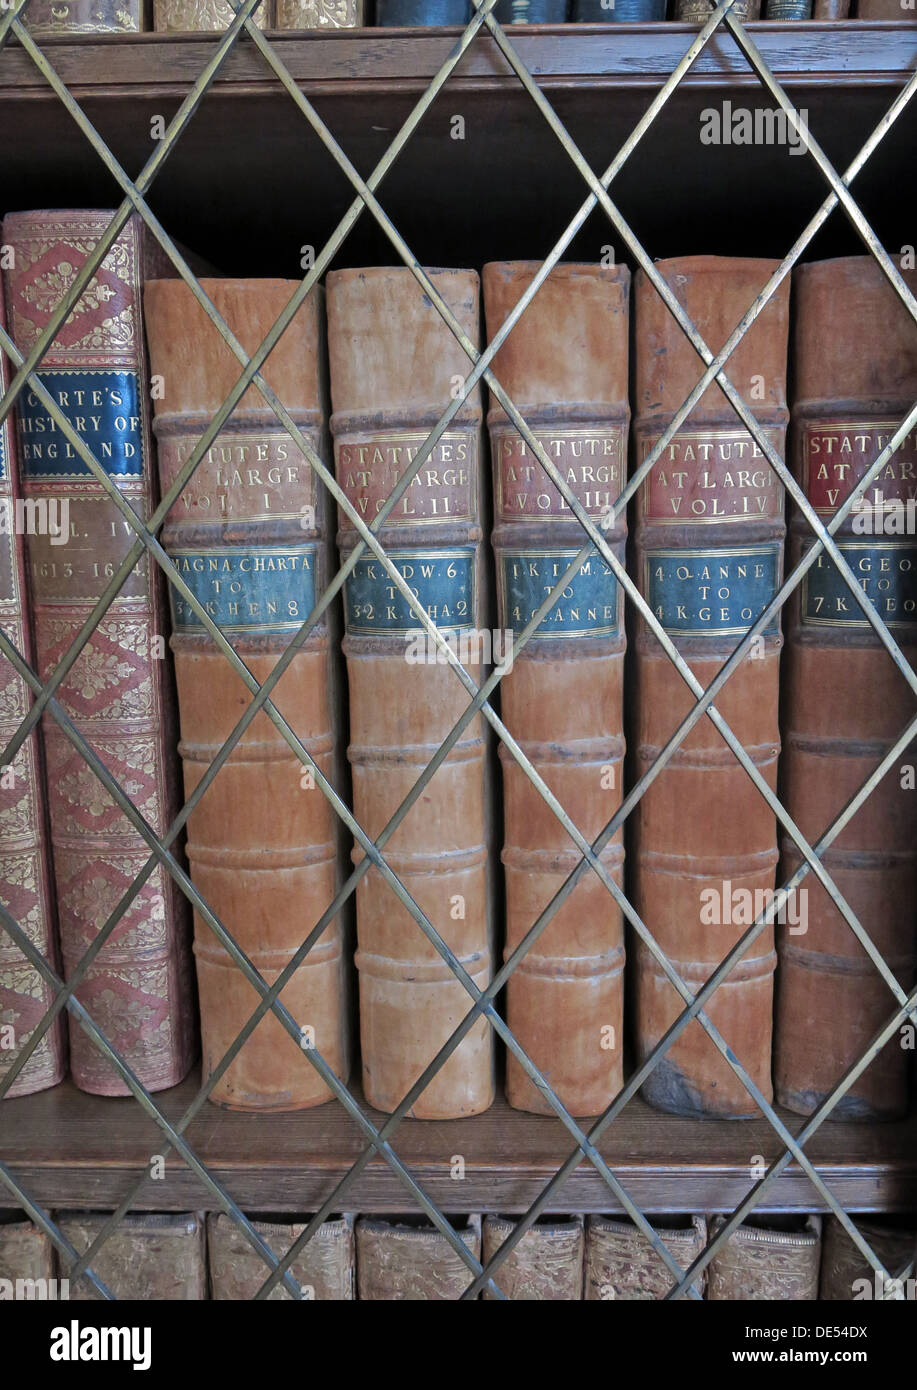 Old antique books in a library,locked away Stock Photo